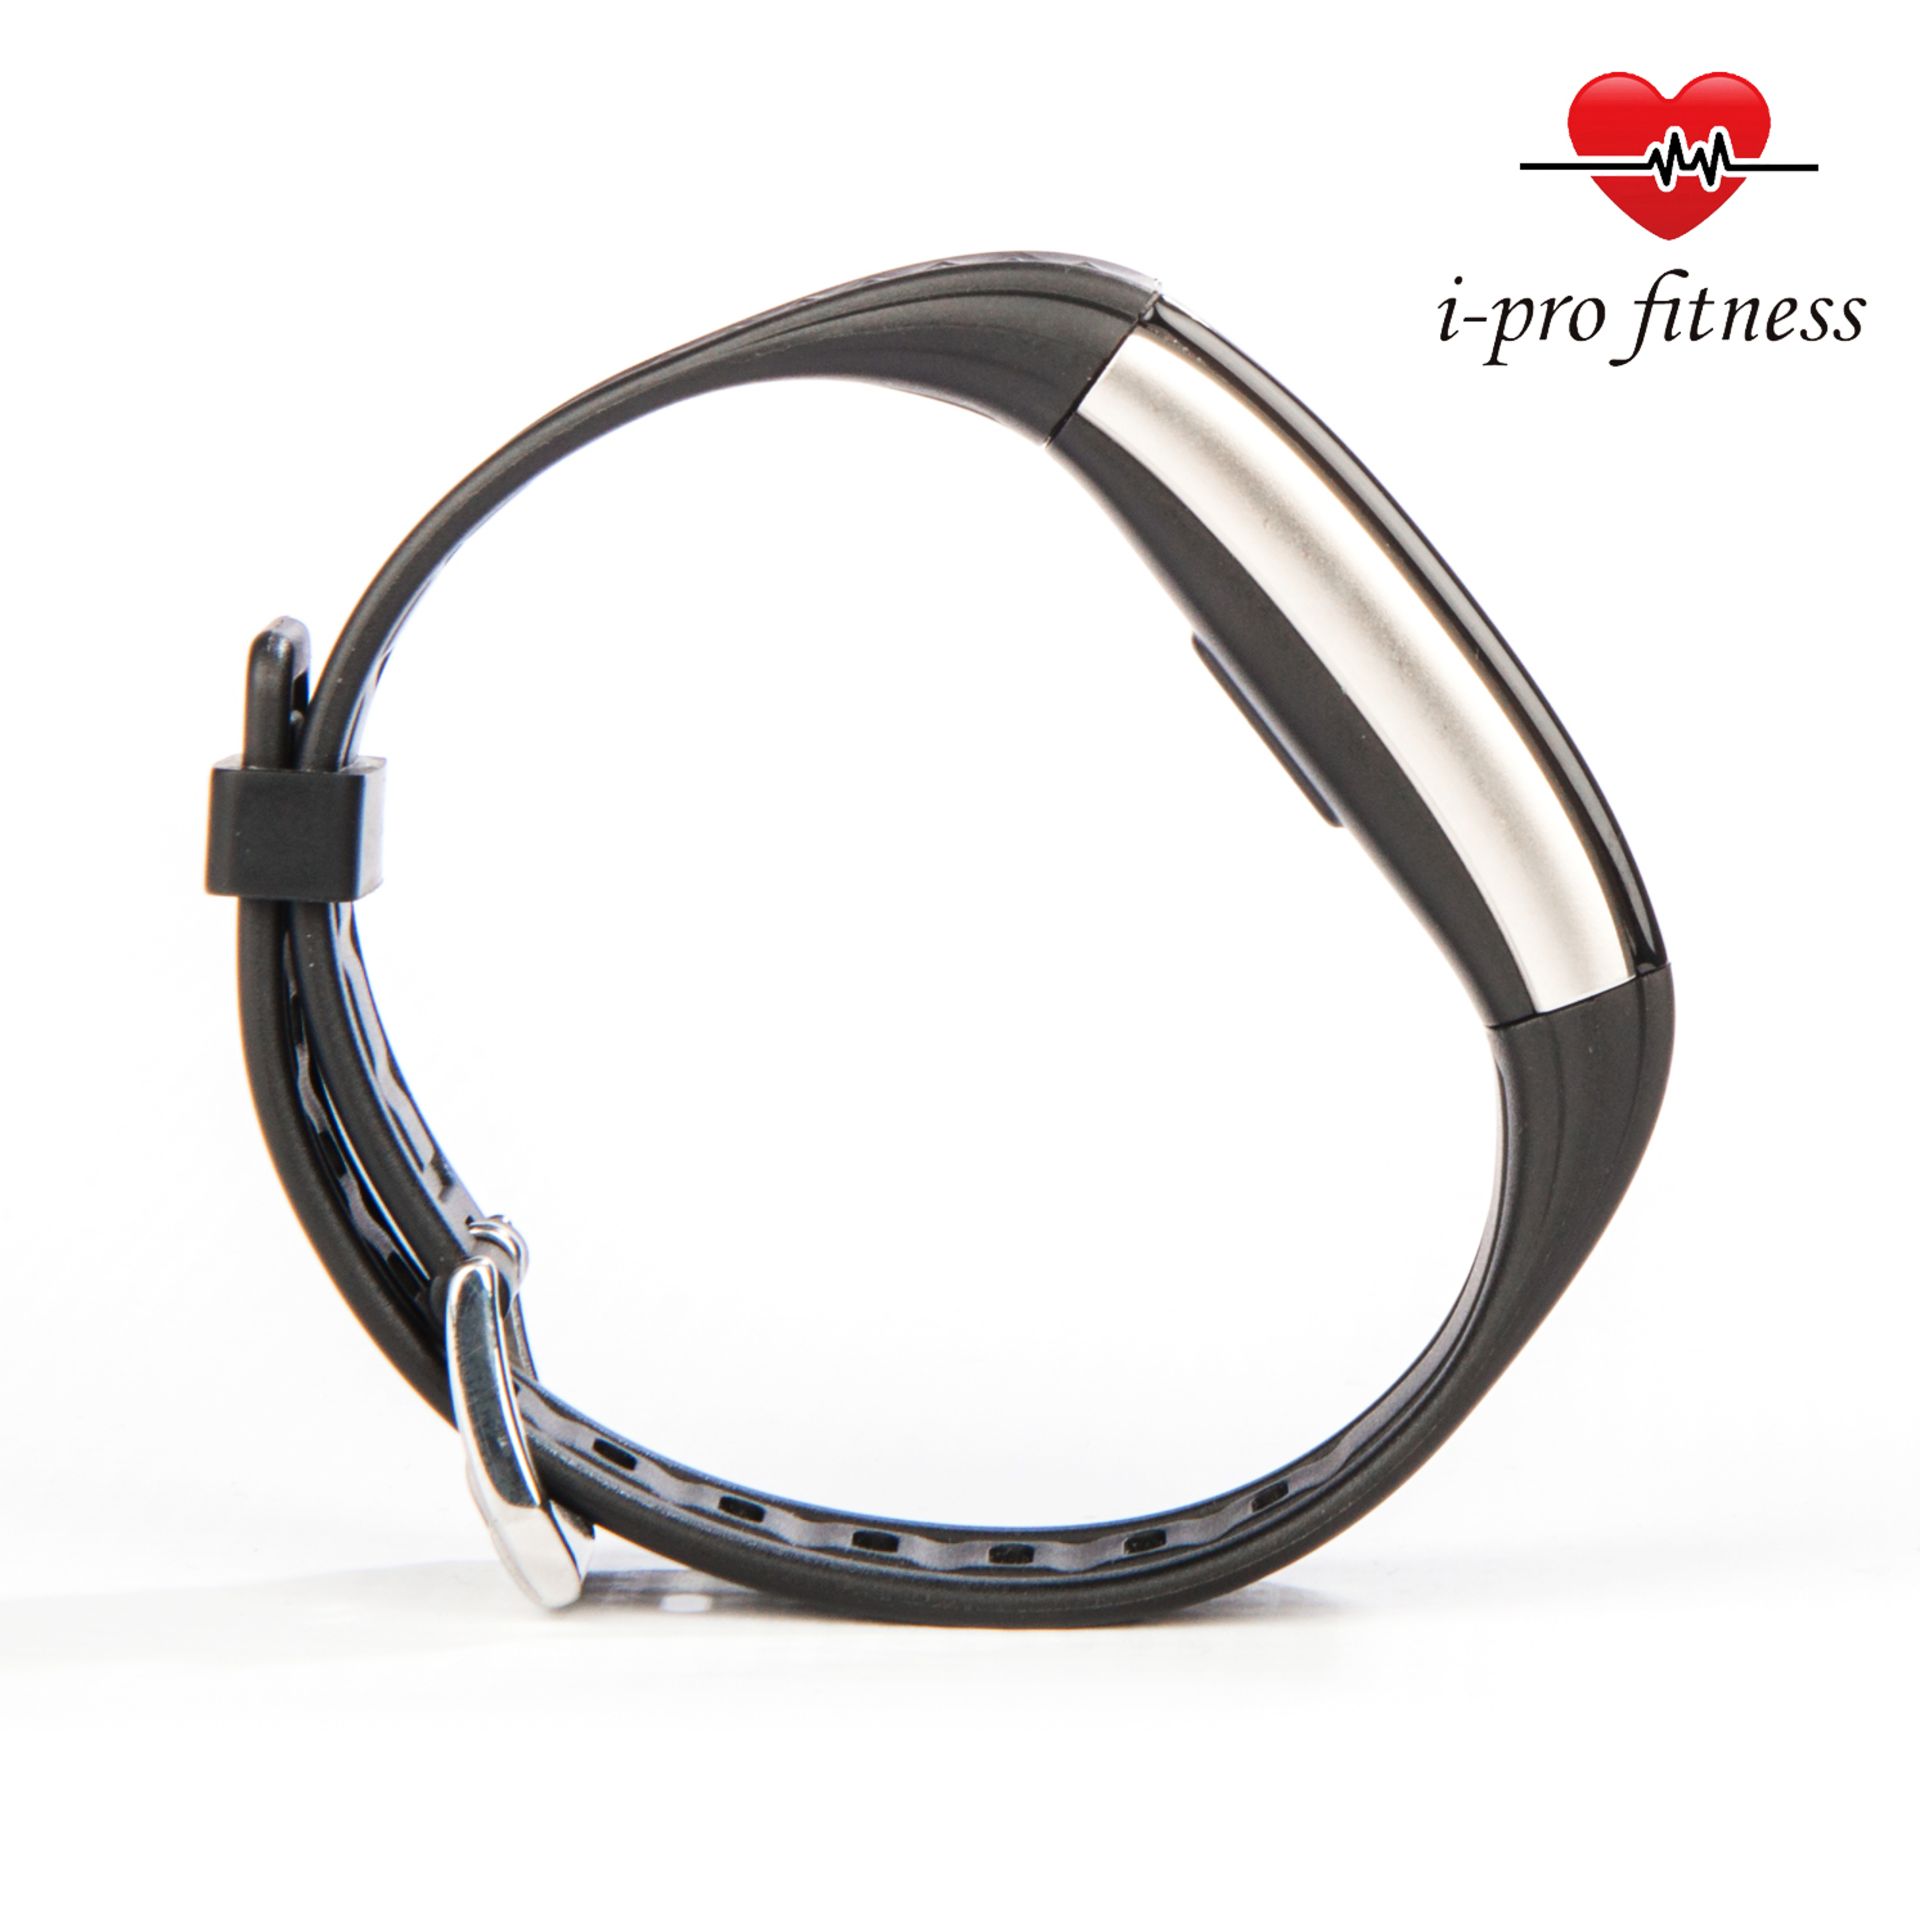 i-Pro S2 Waterproof Fitness Tracker With Heart Rate Monitor, Sleep Tracker App And Calorie Counter - Image 4 of 7